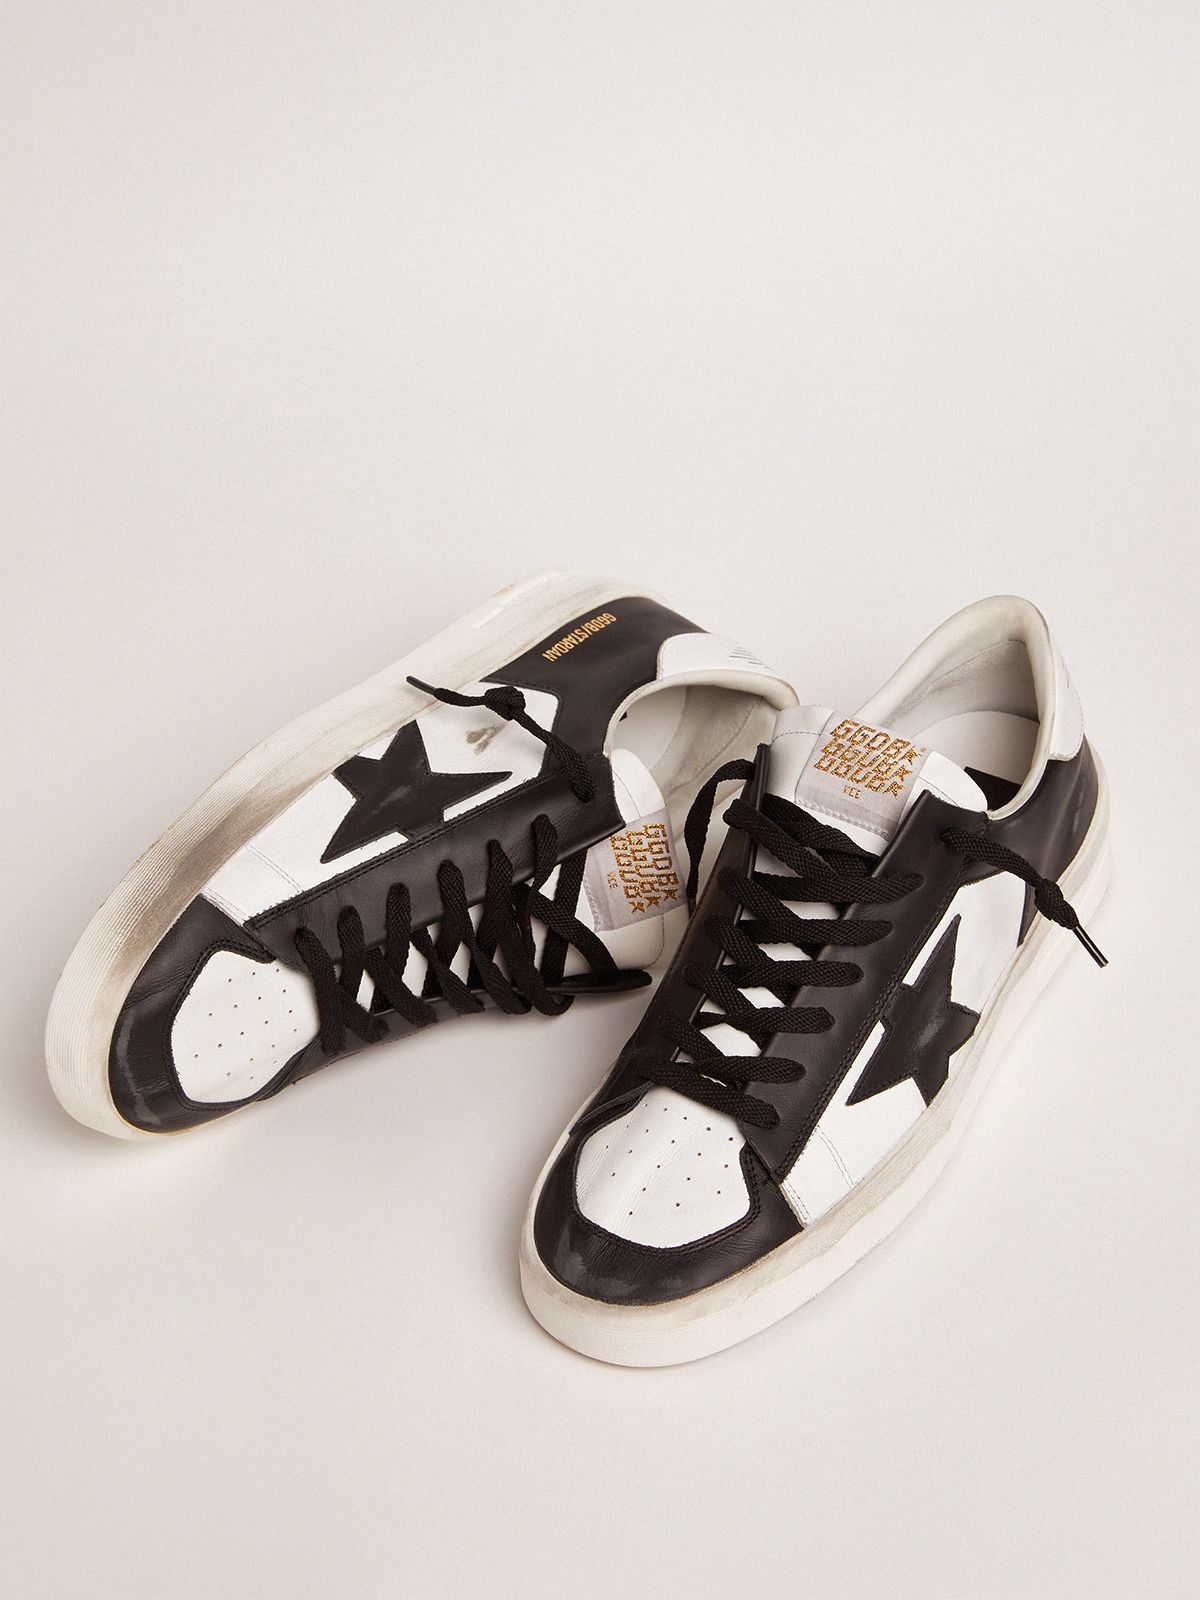 Men's Stardan sneakers in black and white leather | Golden Goose